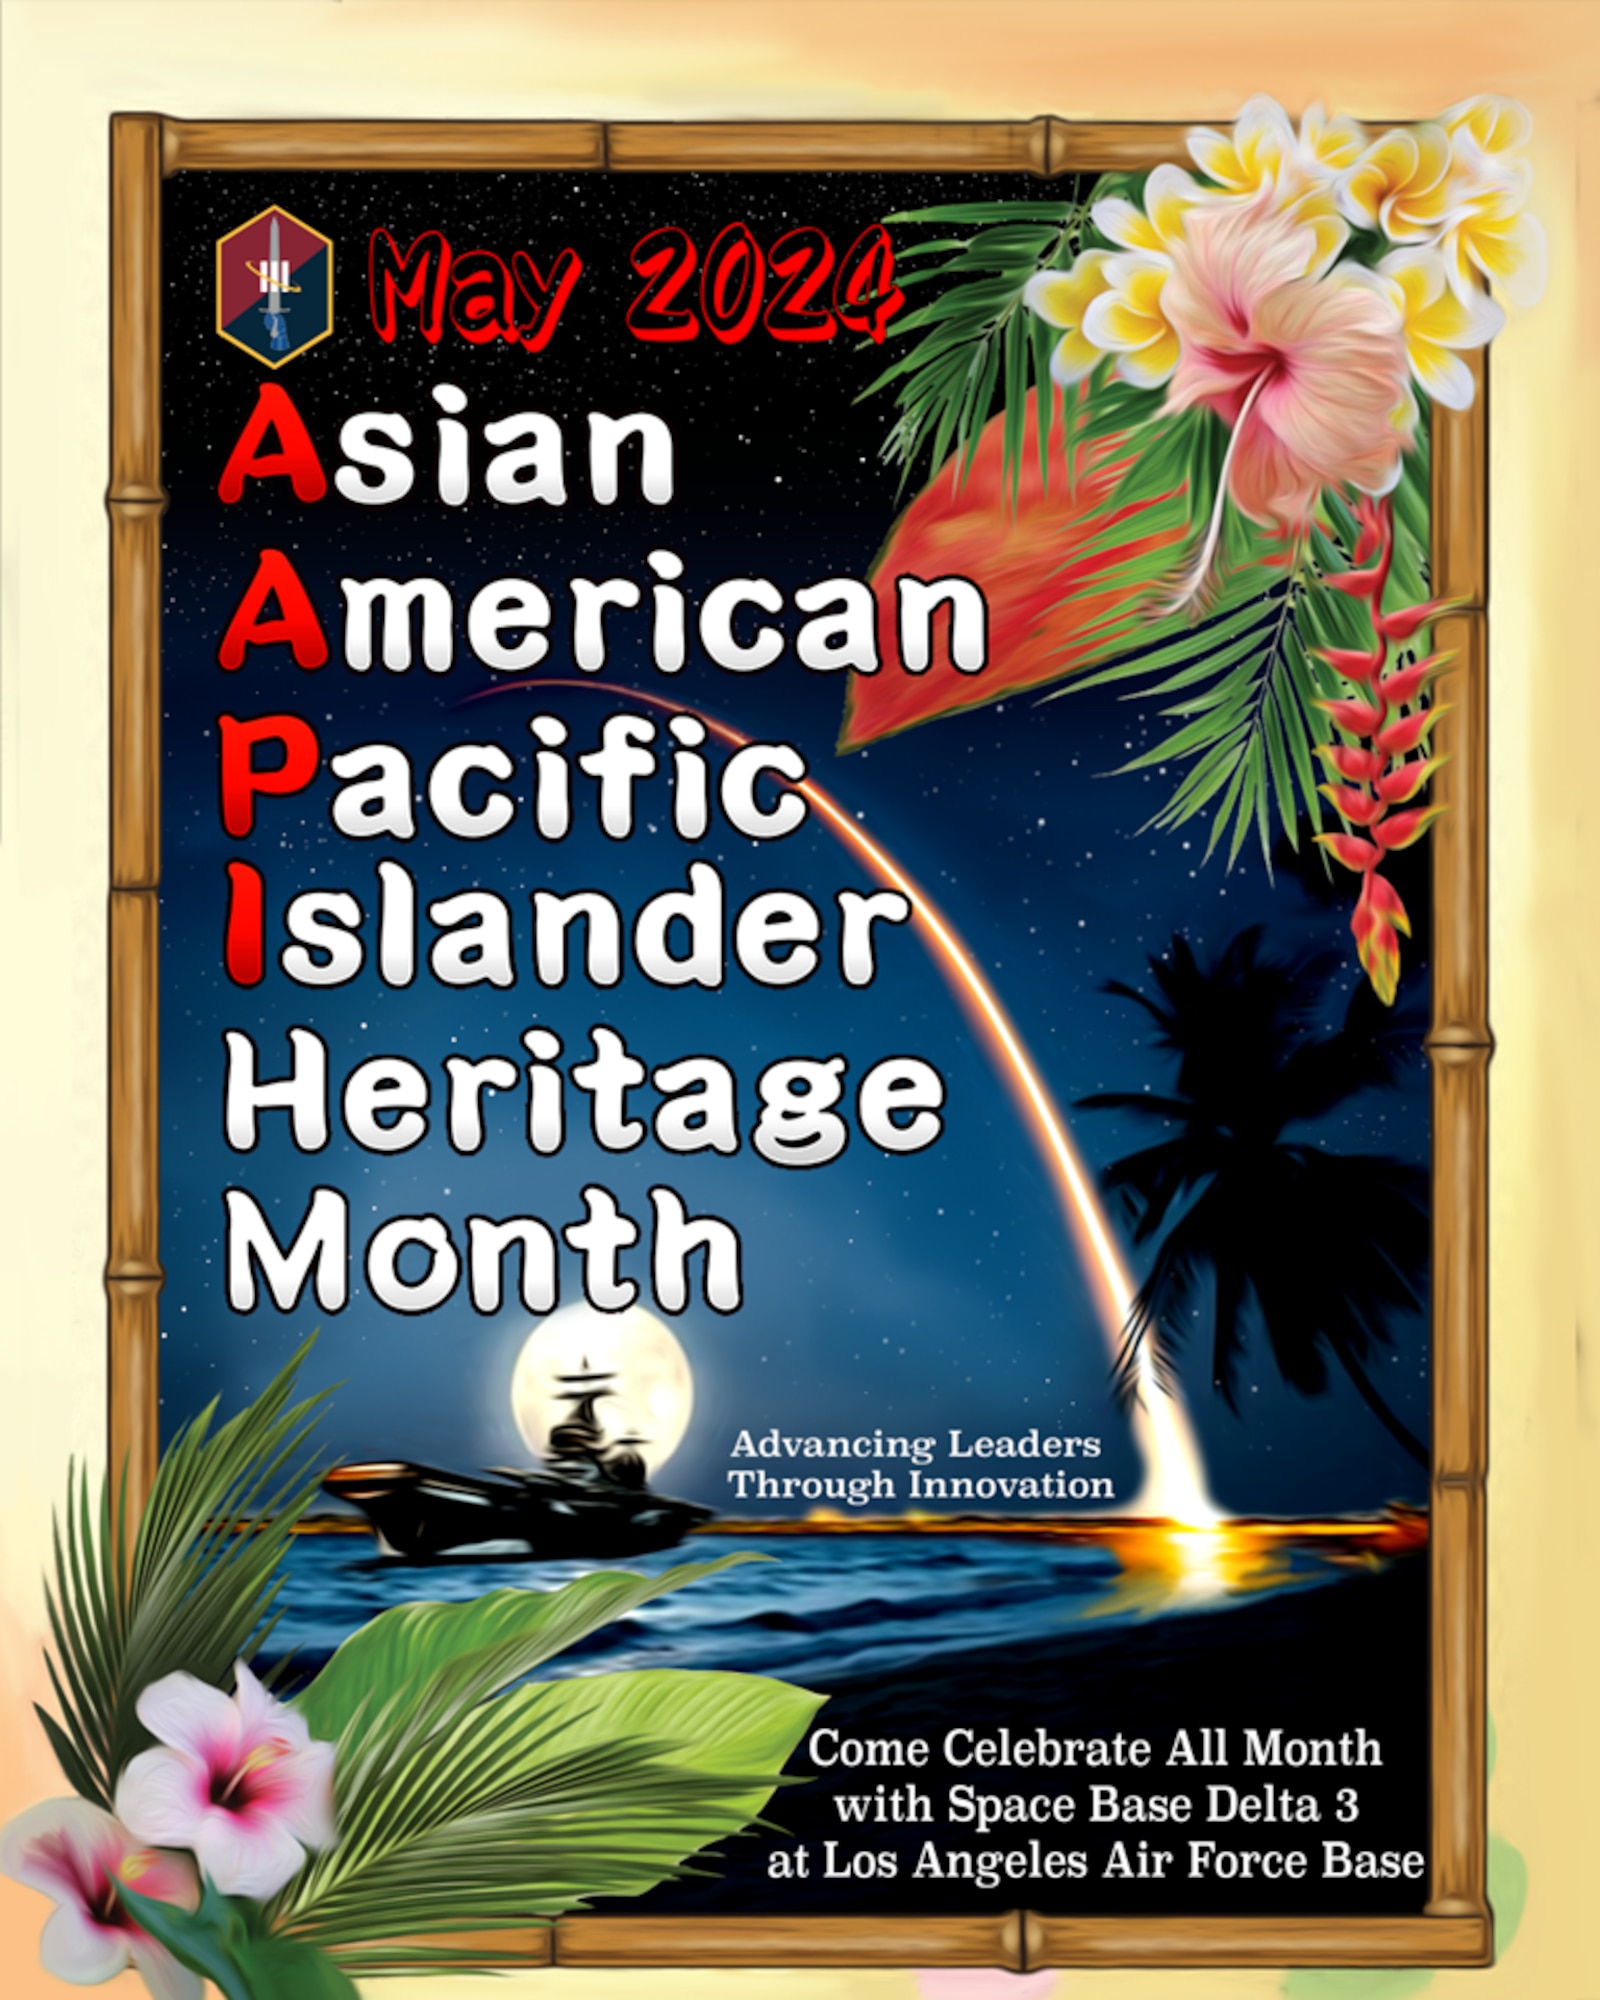 image for Asian American Pacific Islander Heritage Month for May 2024.